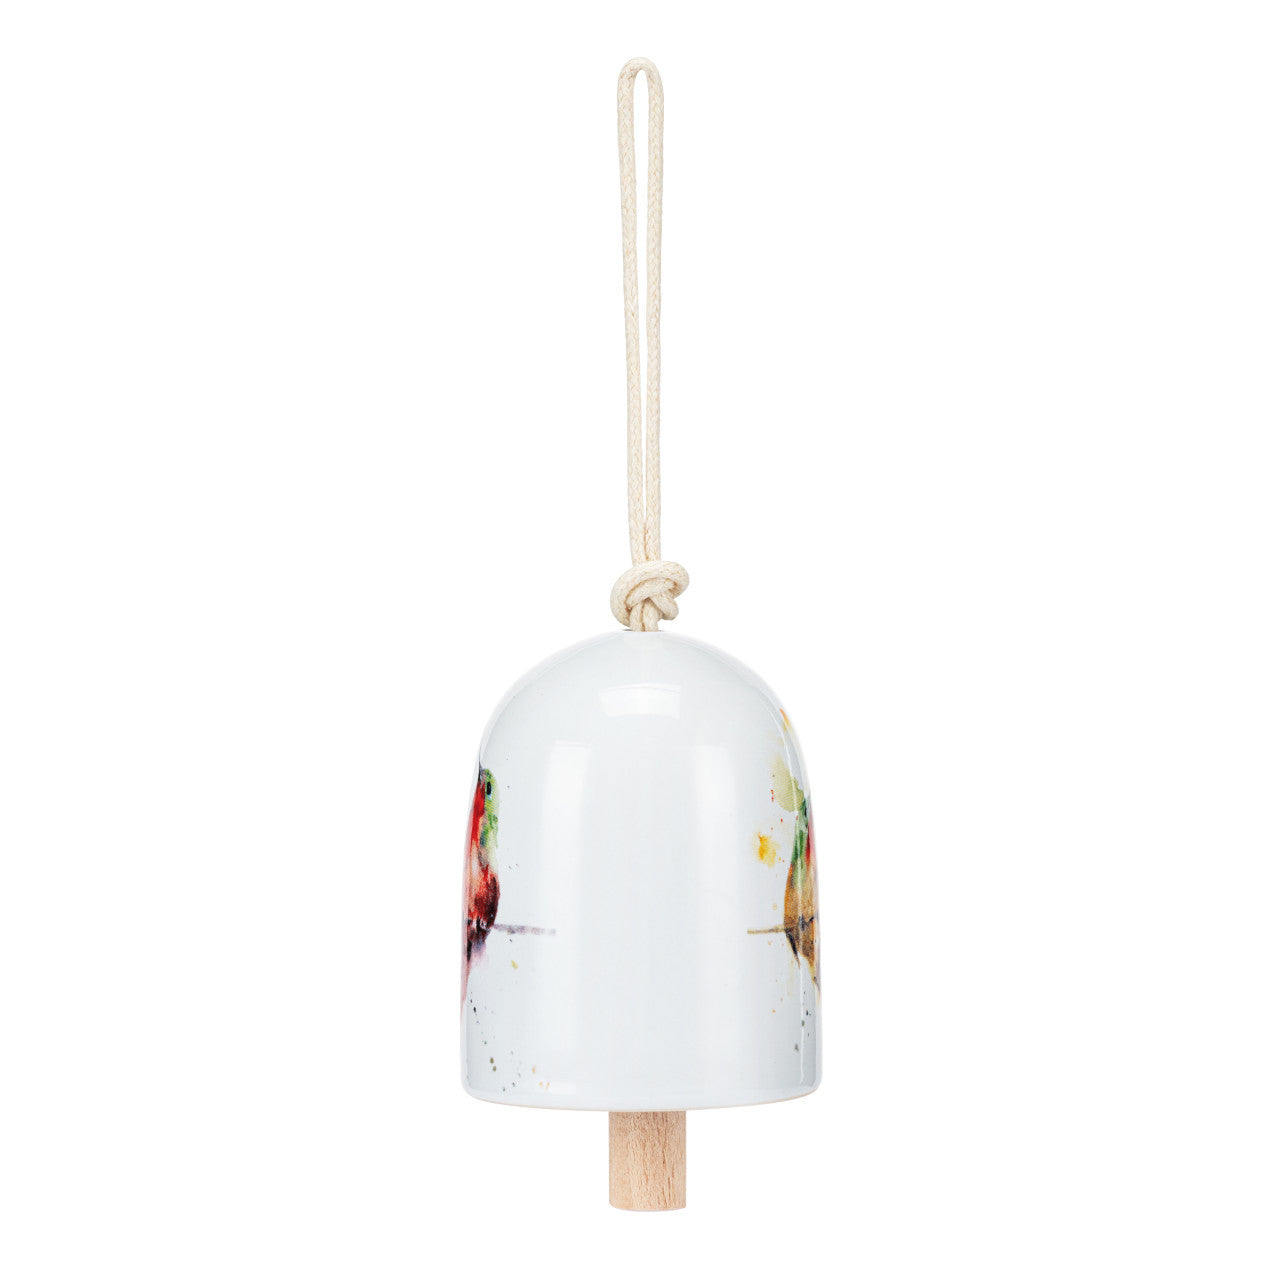 Demdaco Hummers On A Wire Mini Bell available at The Good Life Boutique